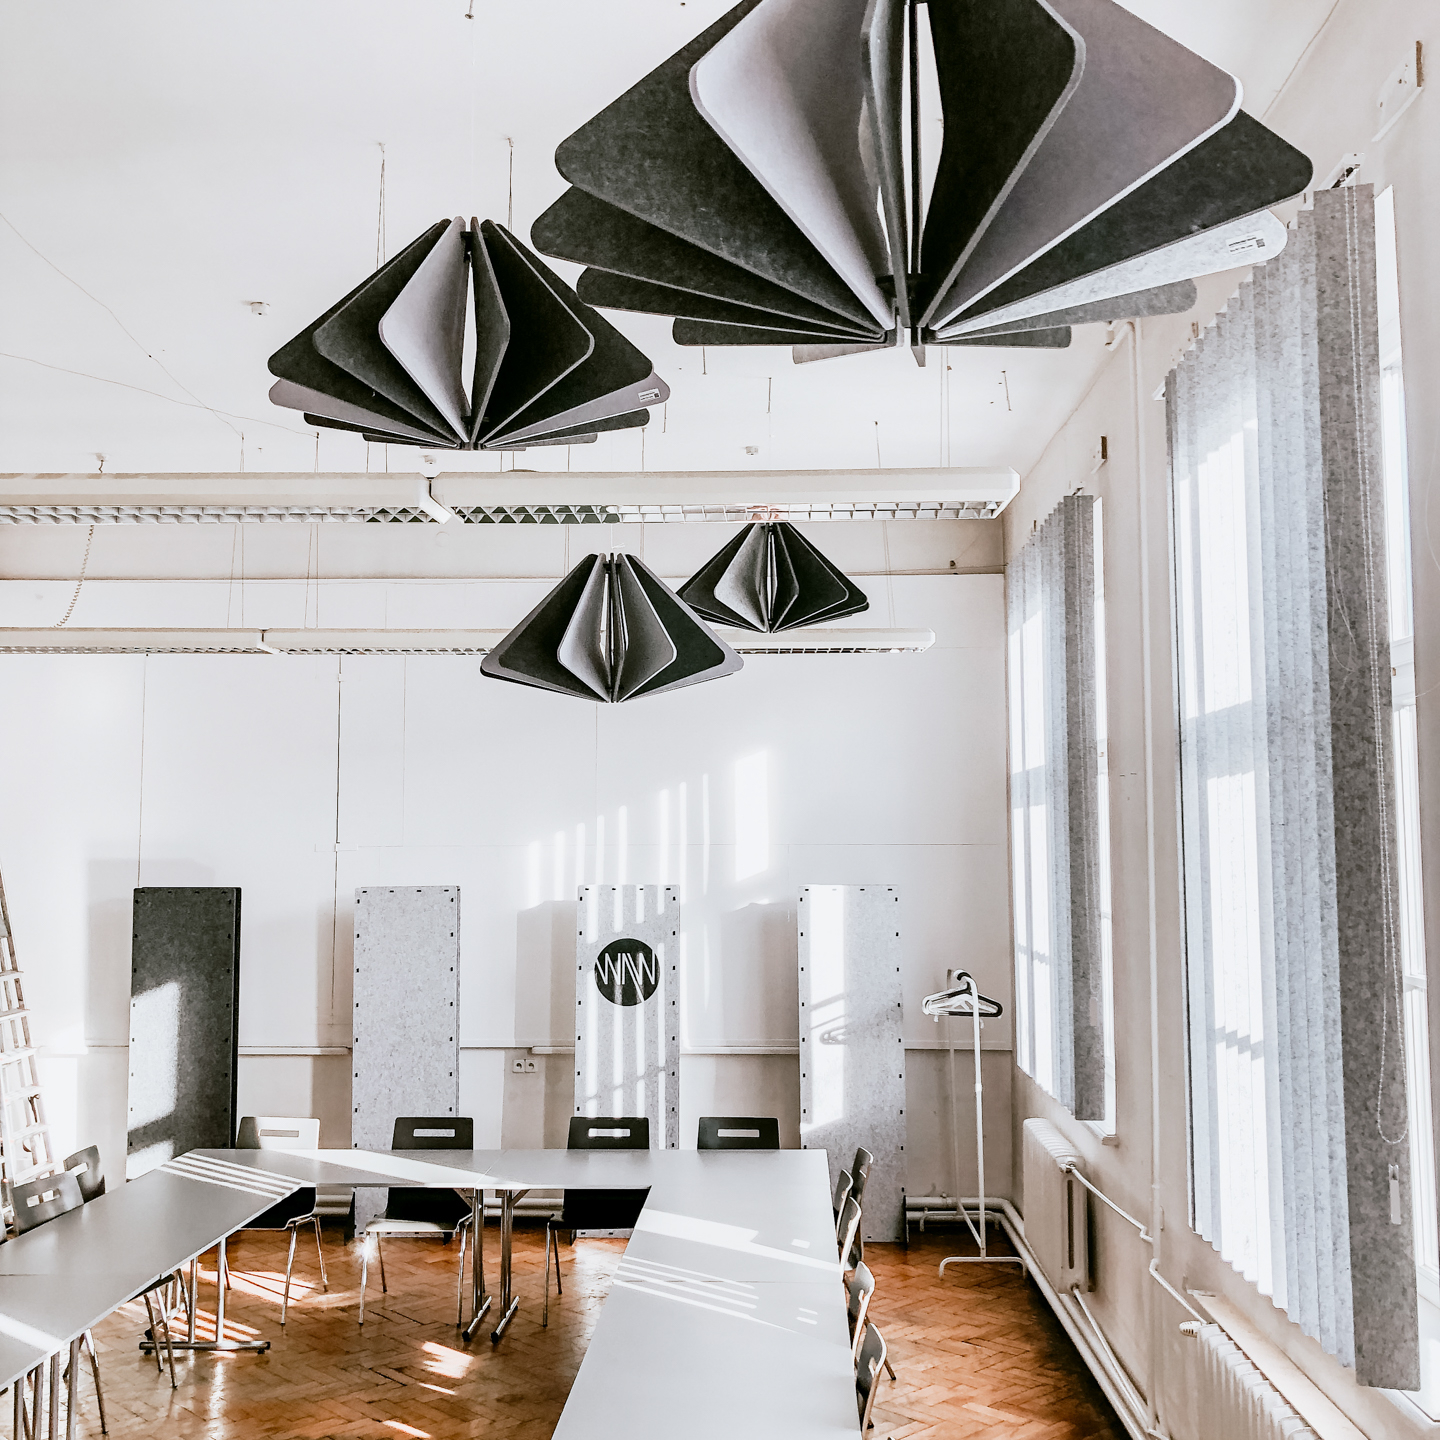 Lecture room at the Academy of Fine Arts in Krakow. Four acoustic ceiling rafts hanging from the ceiling. Sound absorbing acoustic blinds are hanging on two windows.